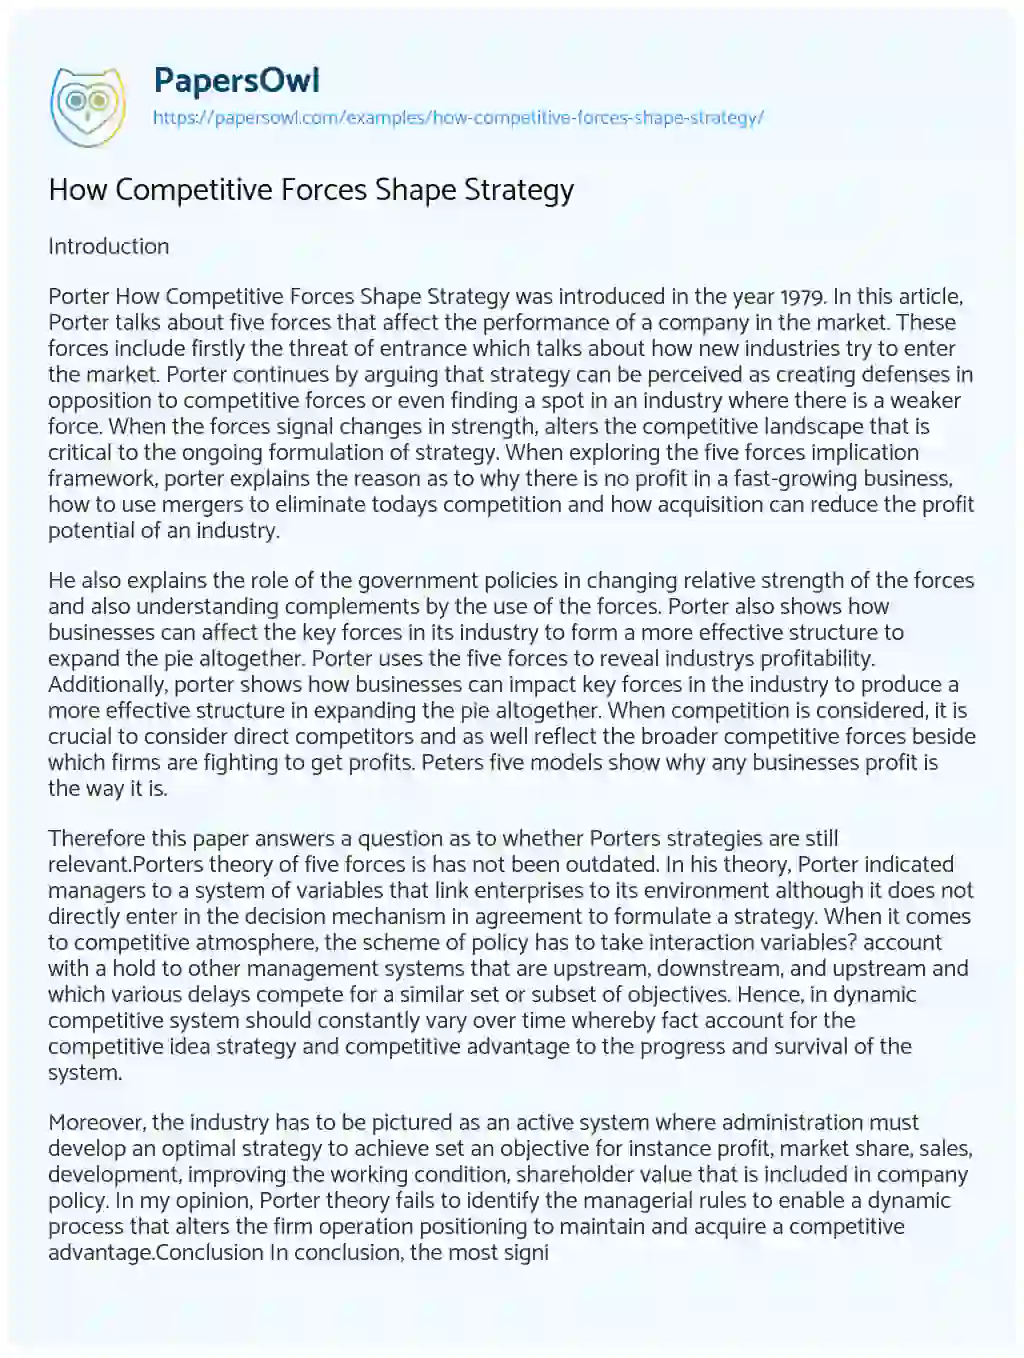 How Competitive Forces Shape Strategy essay